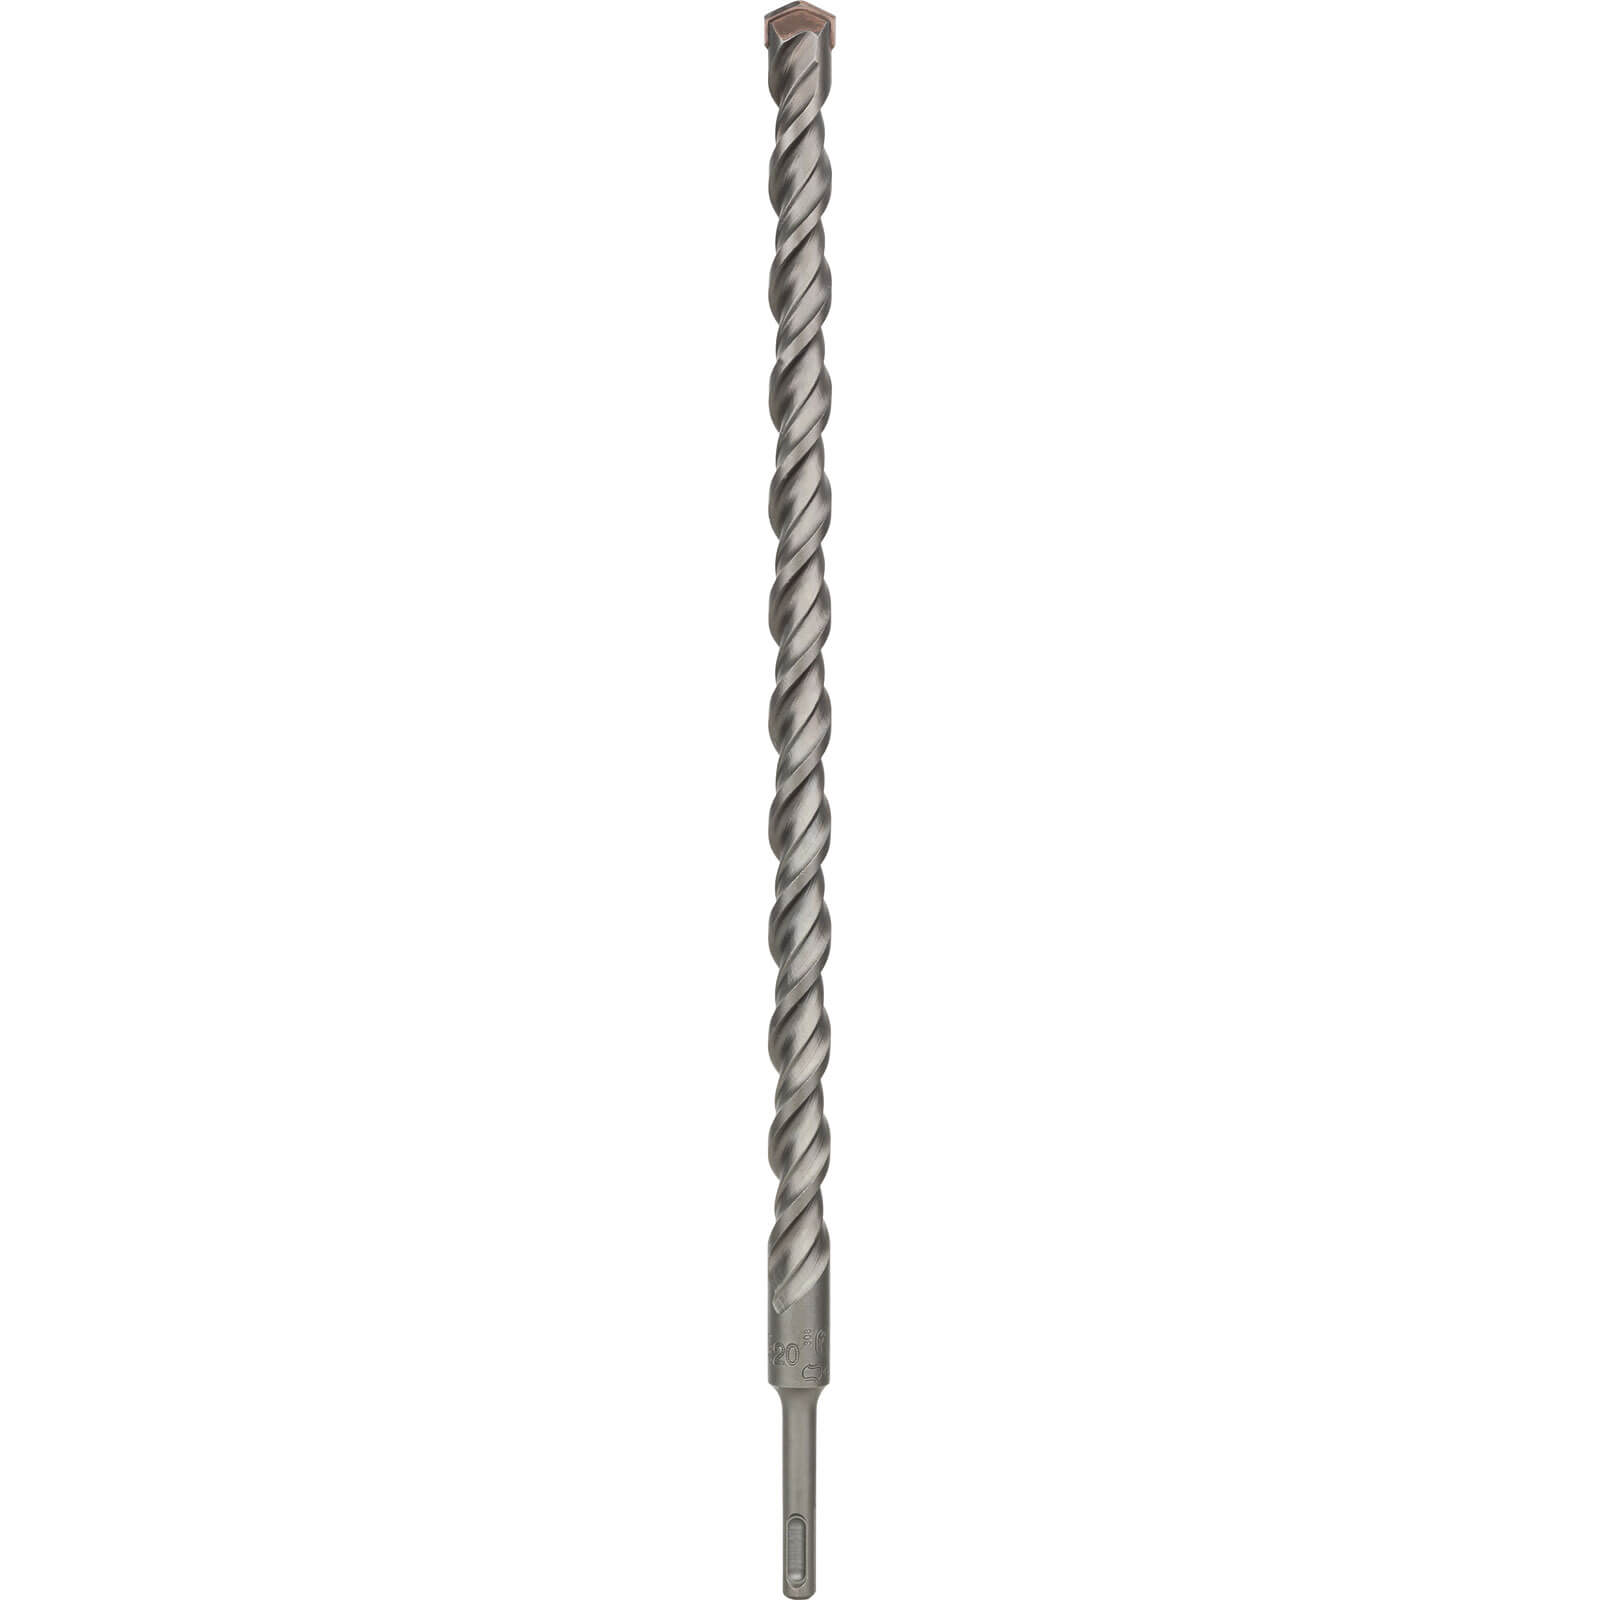 Image of Bosch Series 3 SDS Plus Masonry Drill Bit 20mm 450mm Pack of 1